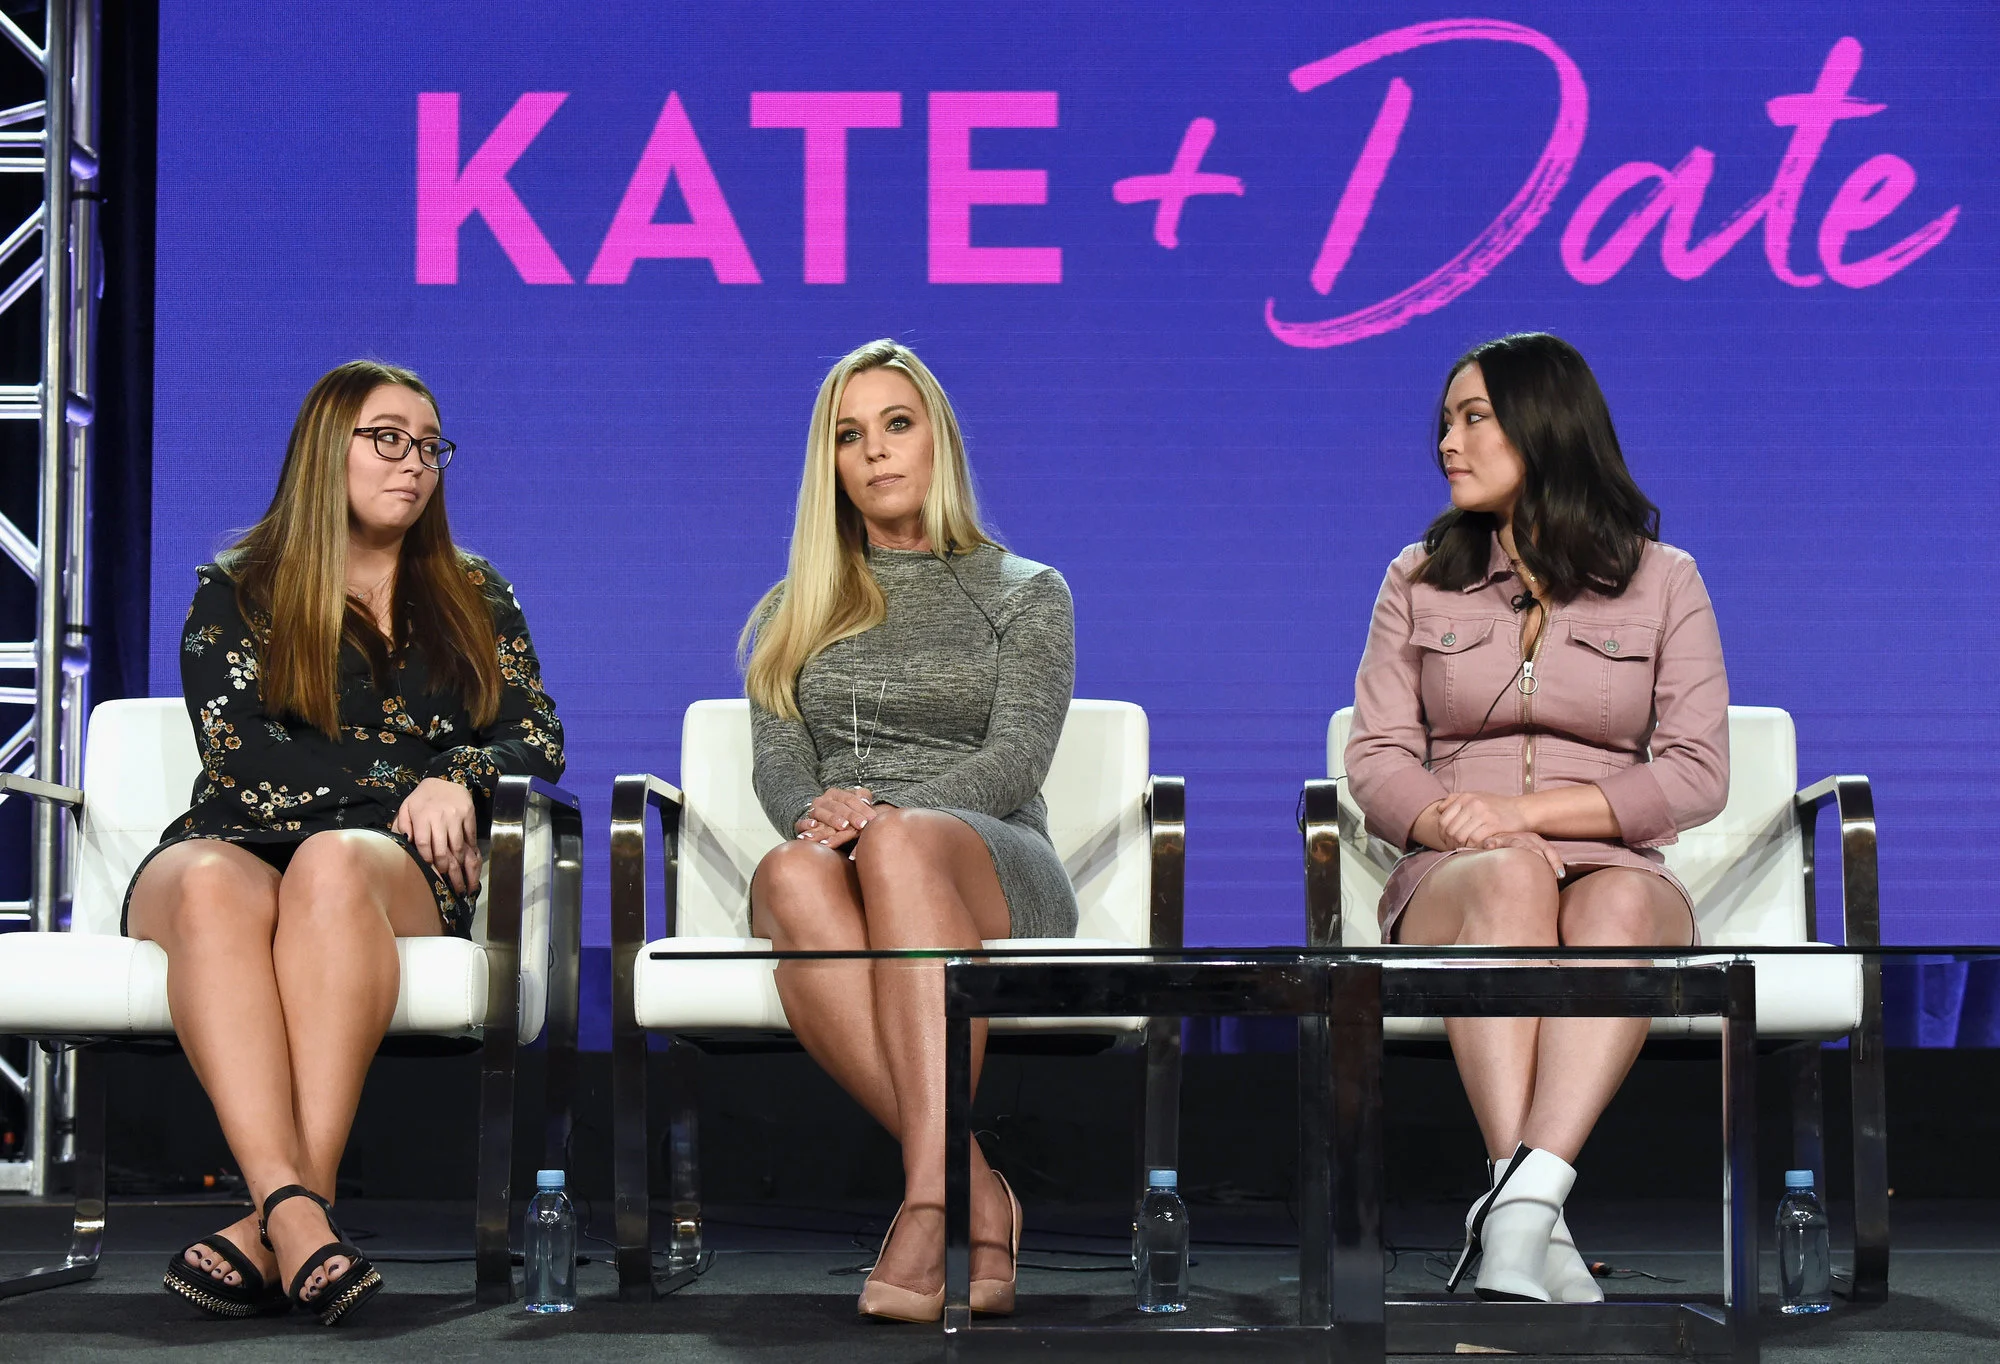 Kate and her twin daughters, Mady and Cara, recently made a public appearance to promote her upcoming reality show.